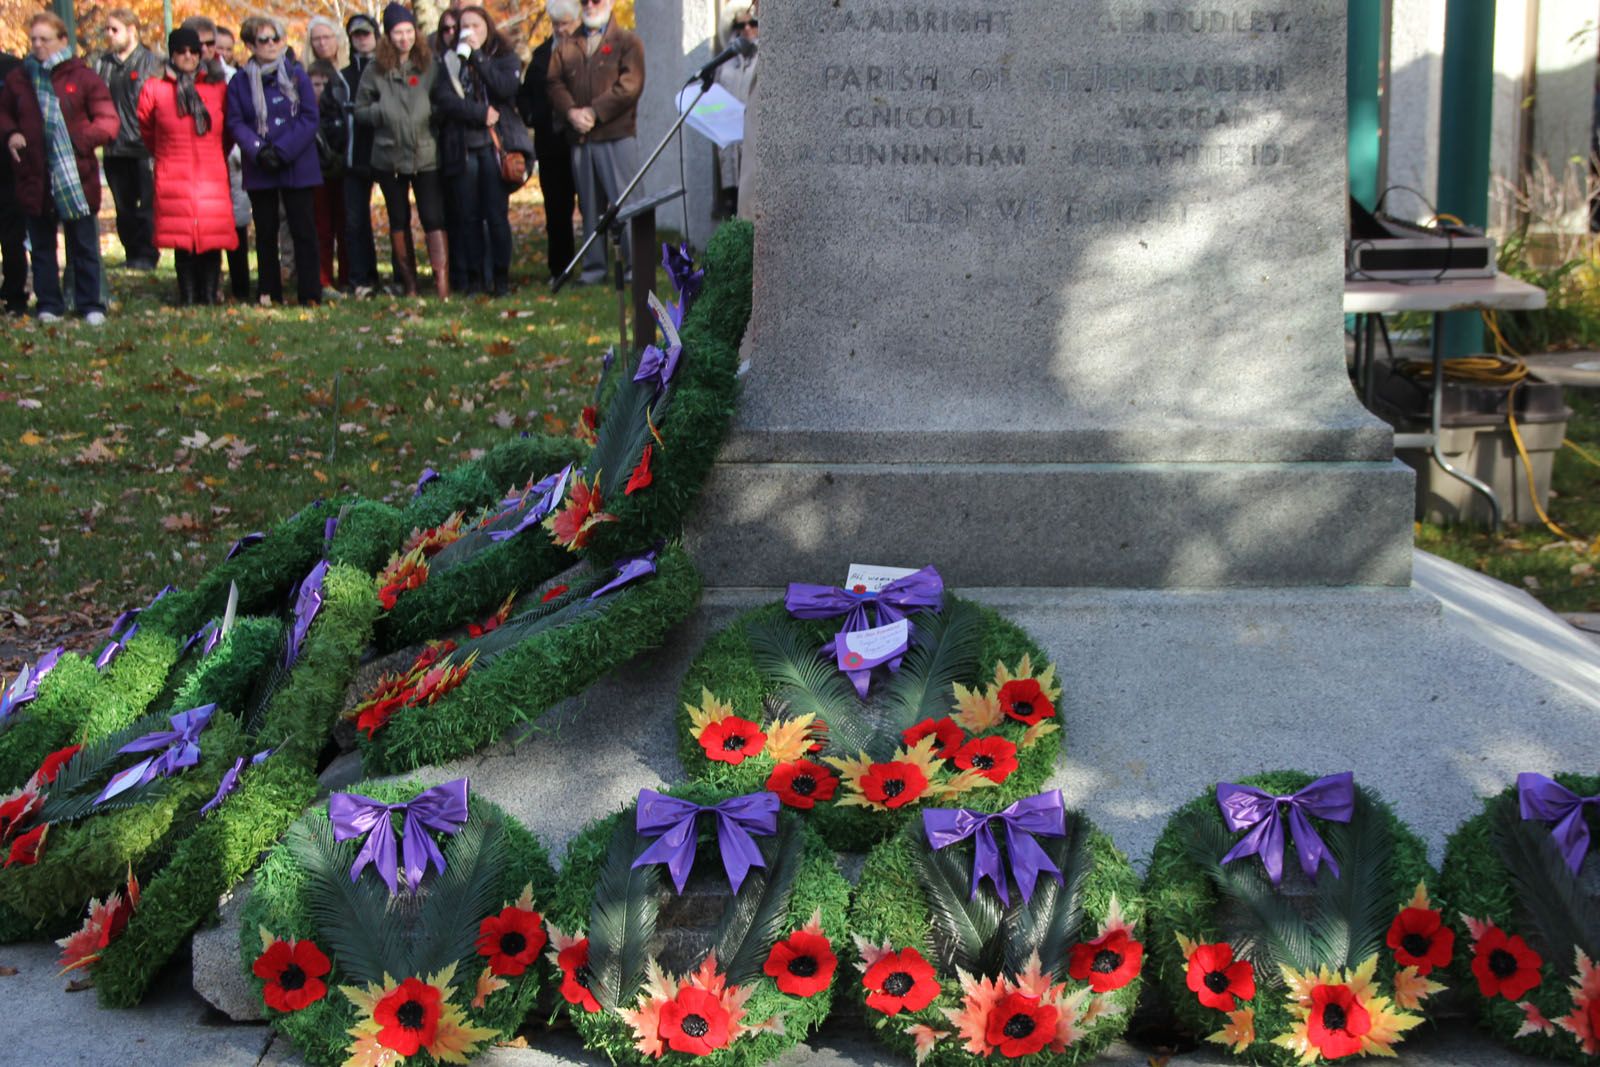 Attend Remembrance Day ceremonies happening close to you